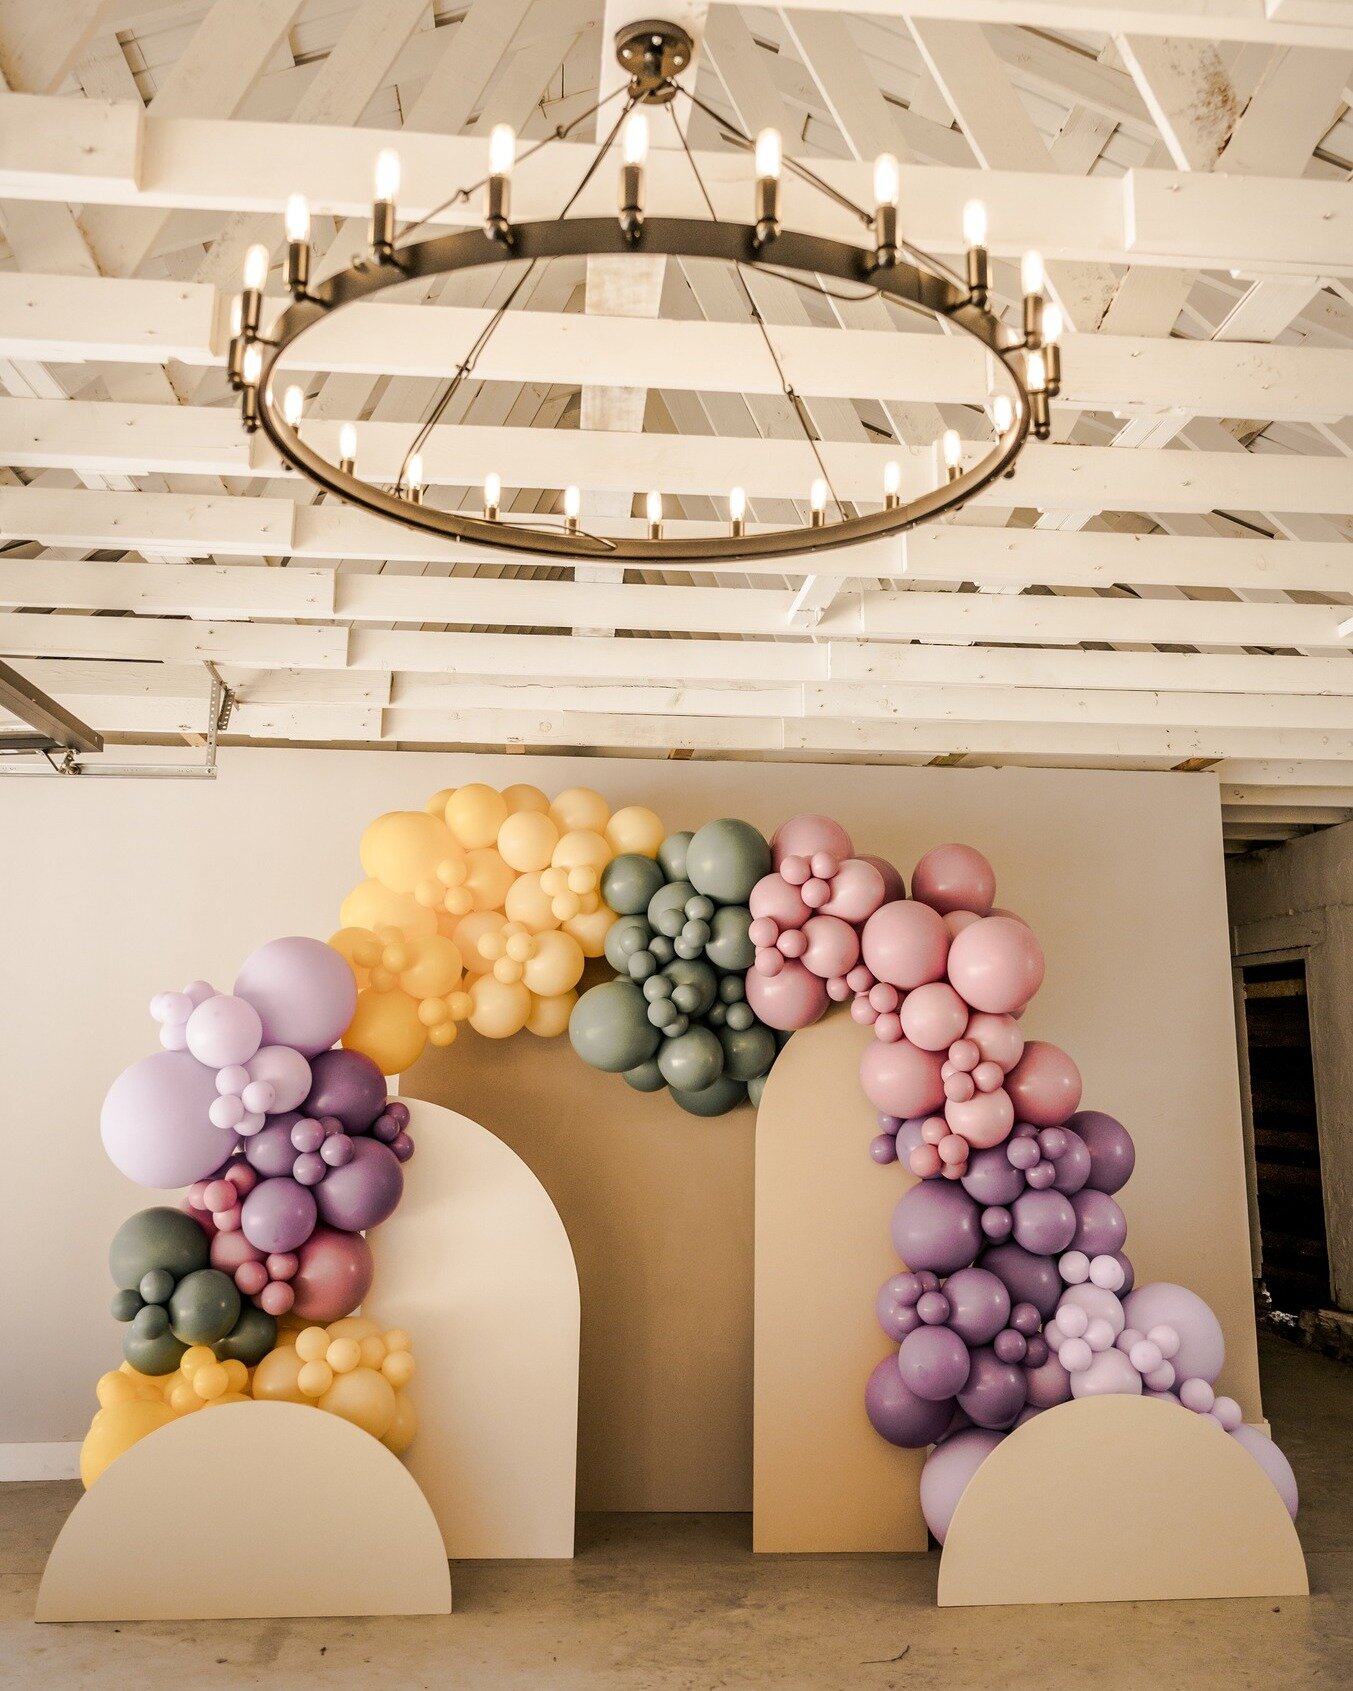 Over-the-top is our favorite.

Item: Organic Garland, Standard (4 Clusters)

 #marylandballoondecor #marylandballoons #frederickmaryland #frederickcountymd #frederickmd  #ballooncolumn #balloonarch #marylandweddings #balloongarland #specialevents